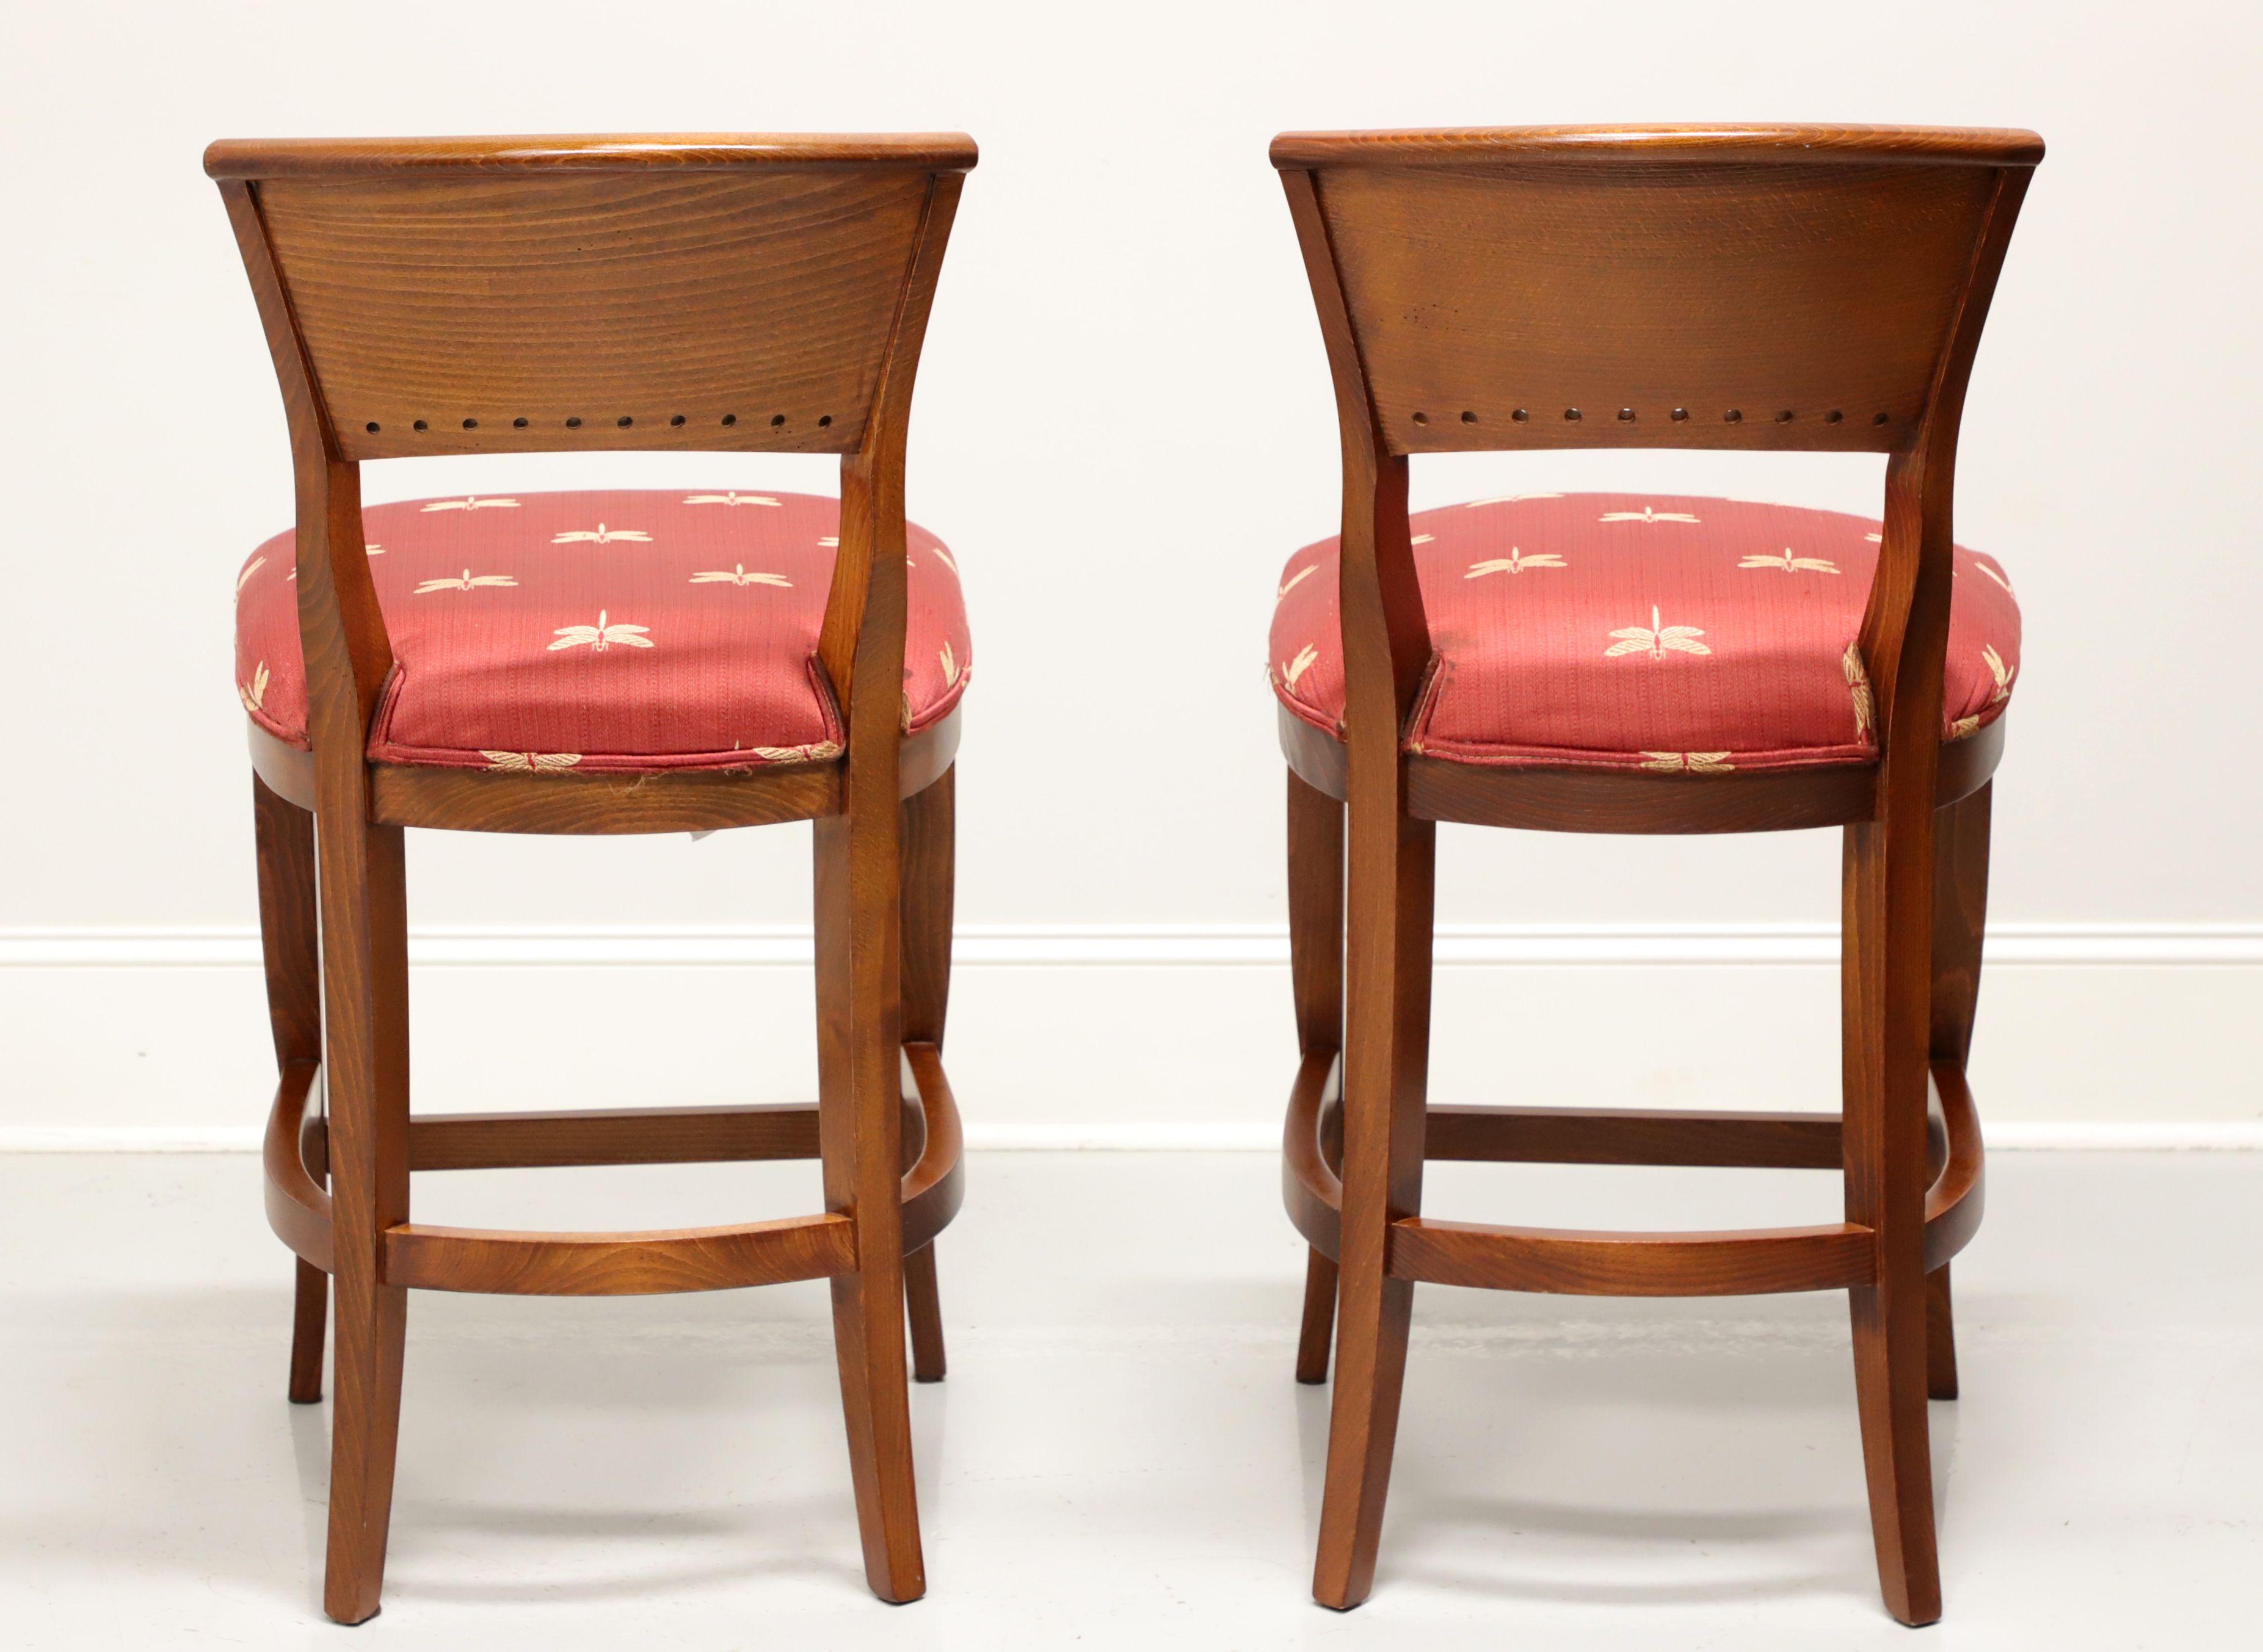 American Tiger & Burl Oak Counter Height Stools by EMERSON ET CIE - Pair B